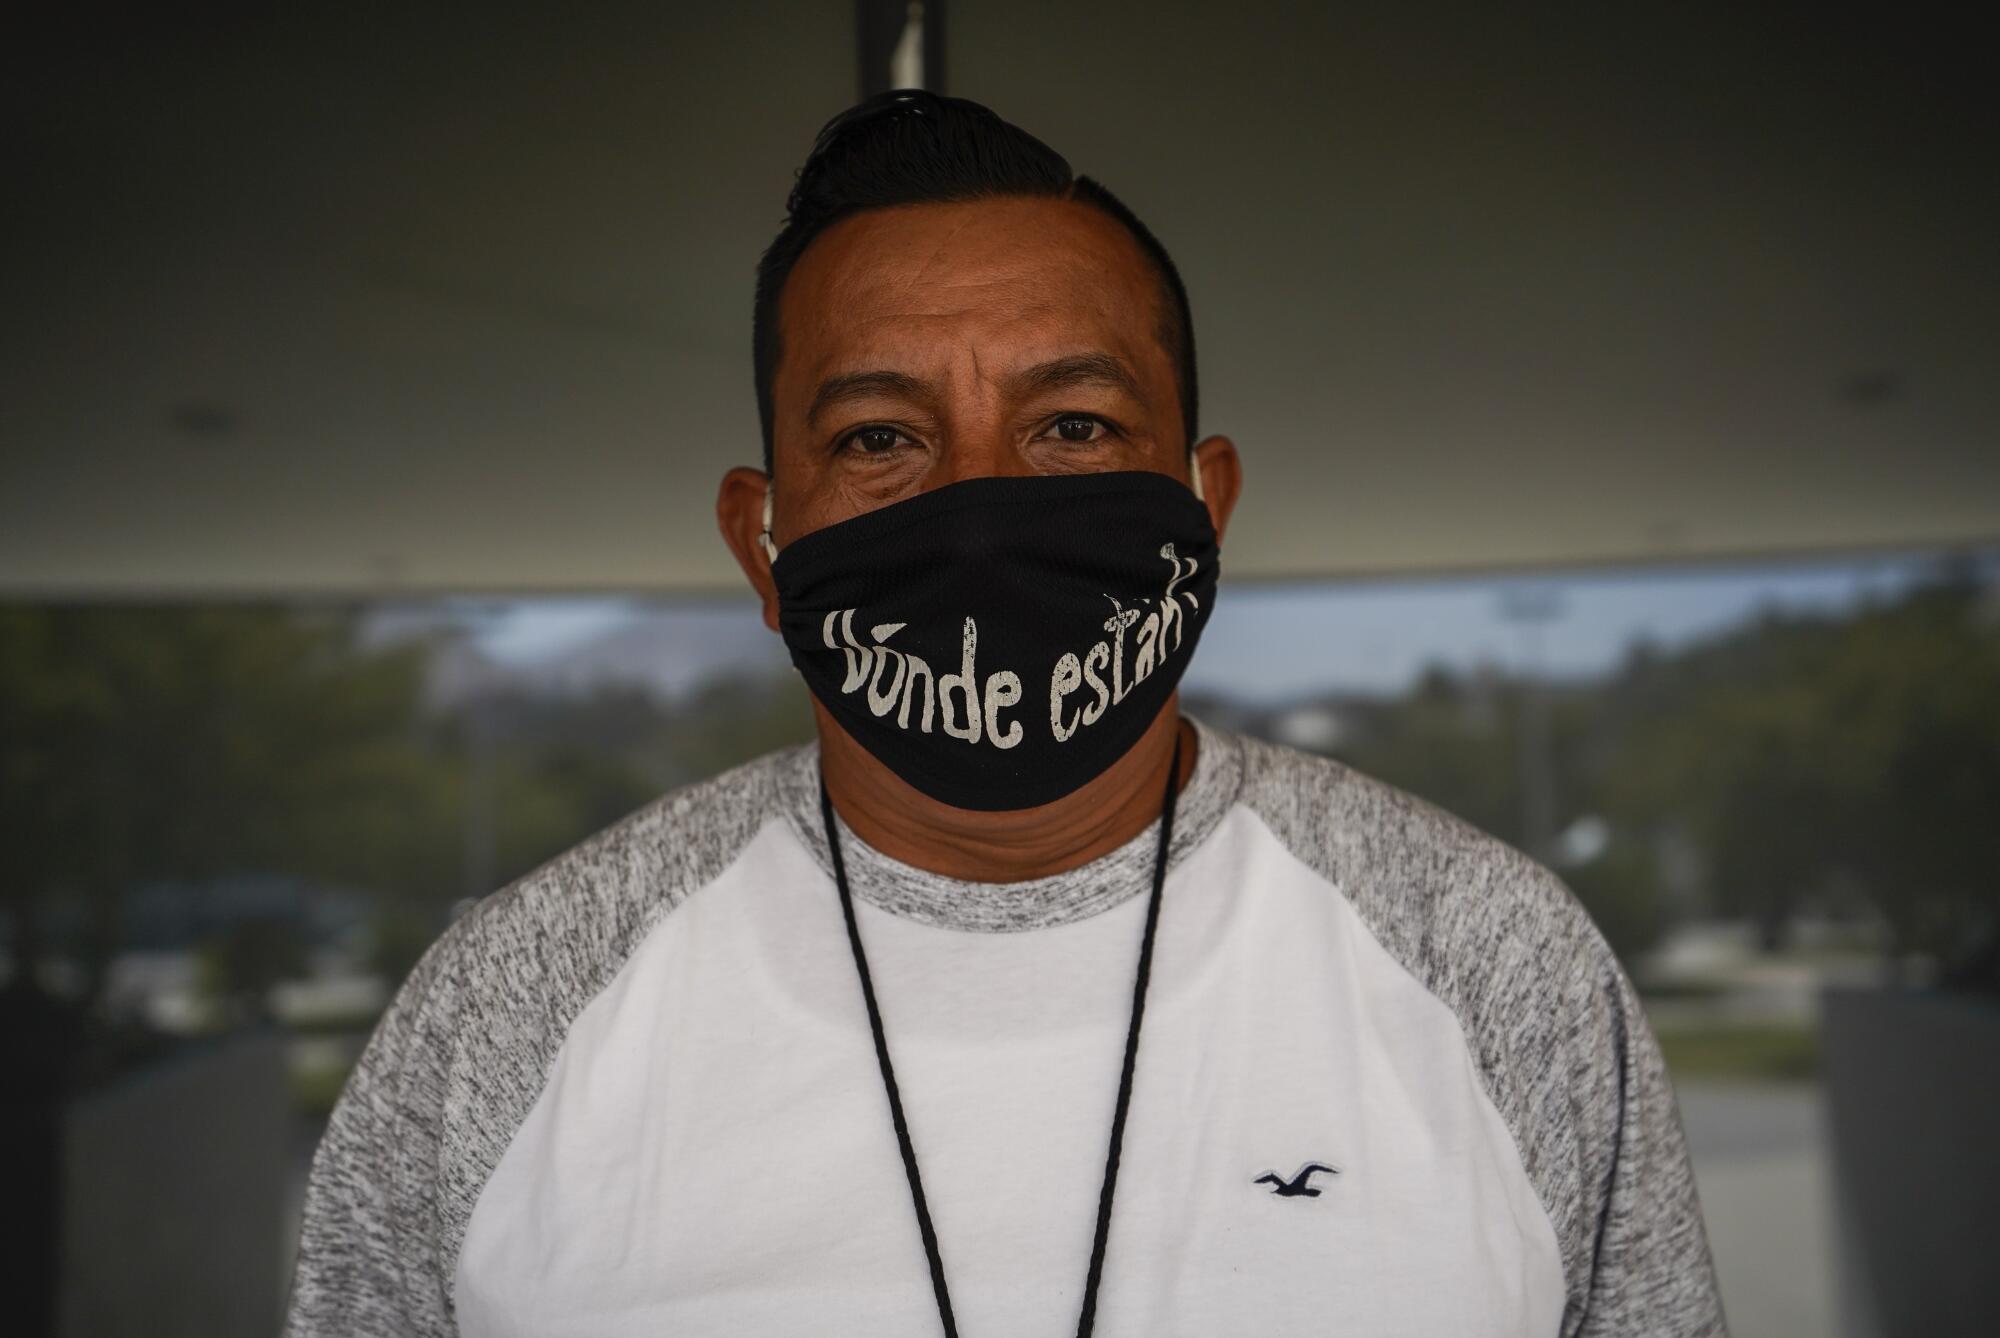 Eddy Carrillo is searching for his missing son, Erick. His mask reads "Where are they?"